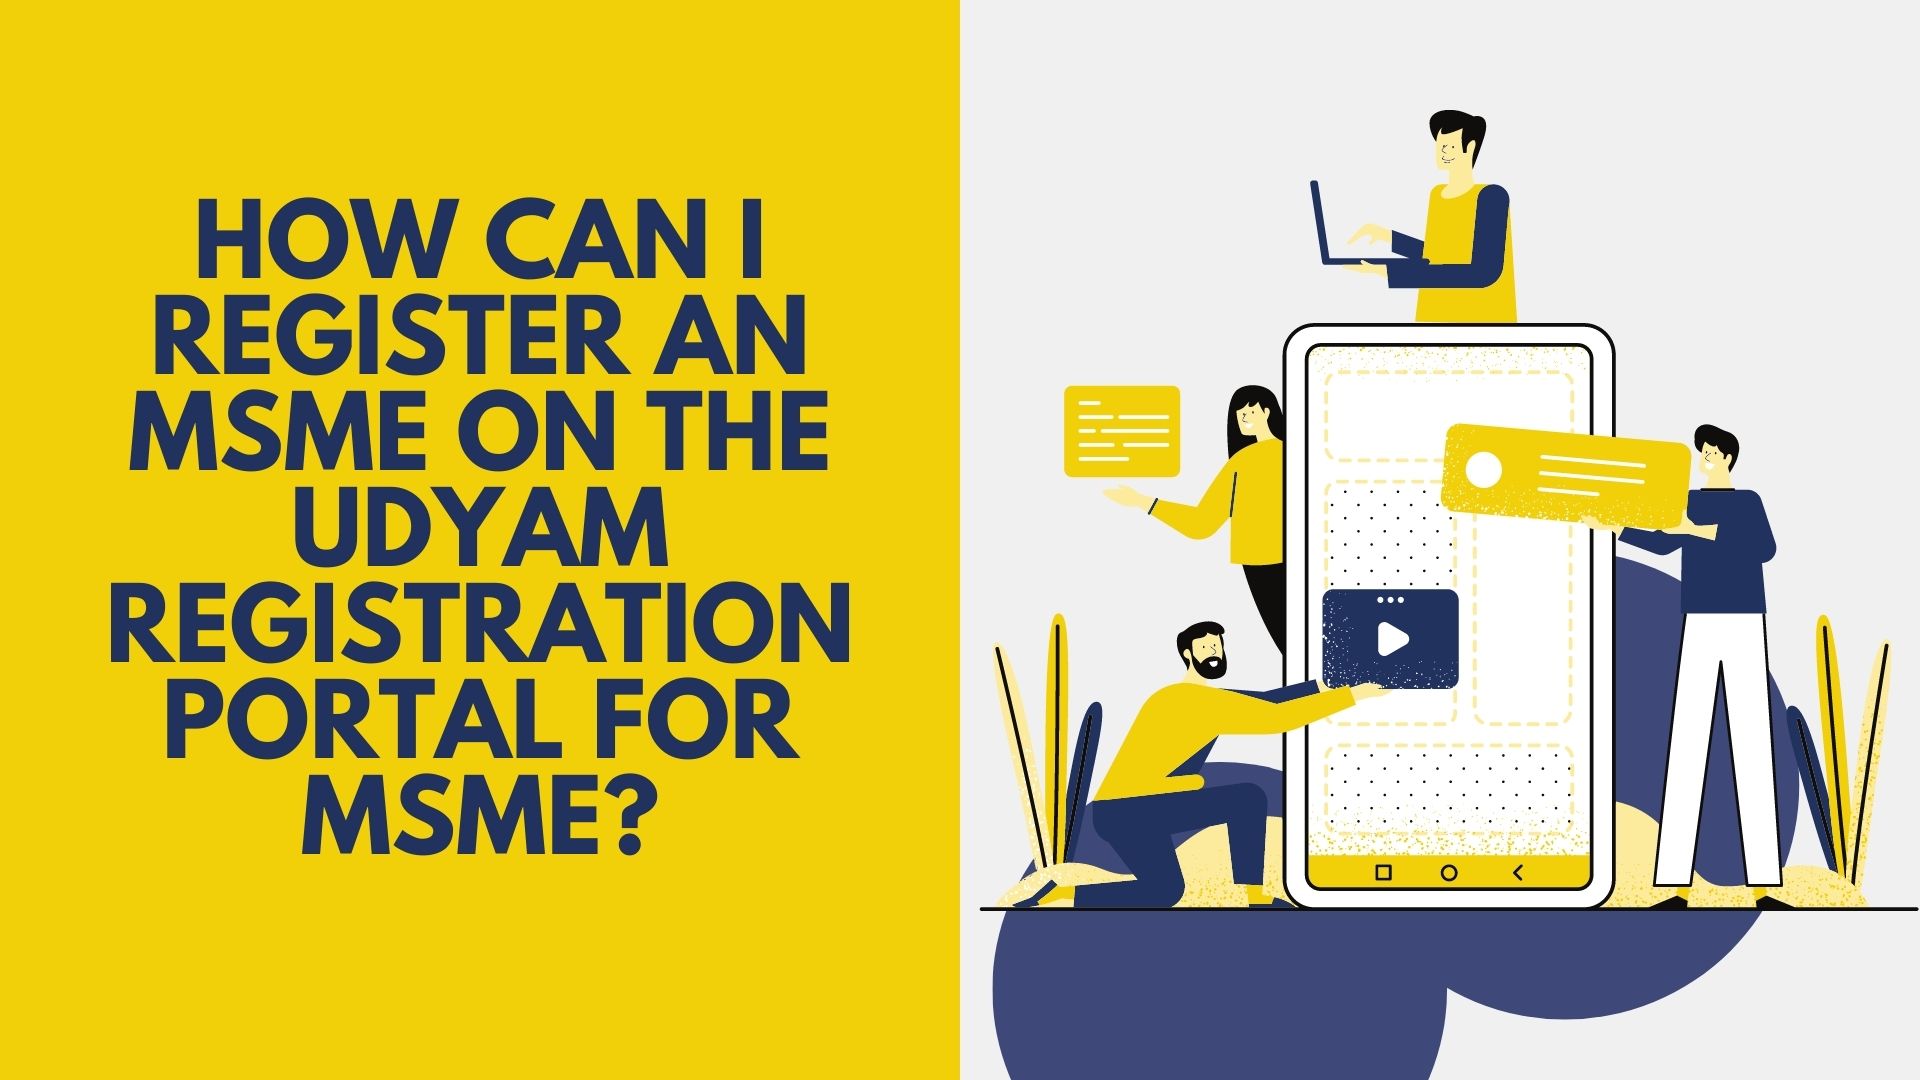 How can I register an MSME on the Udyam Registration Portal for MSME